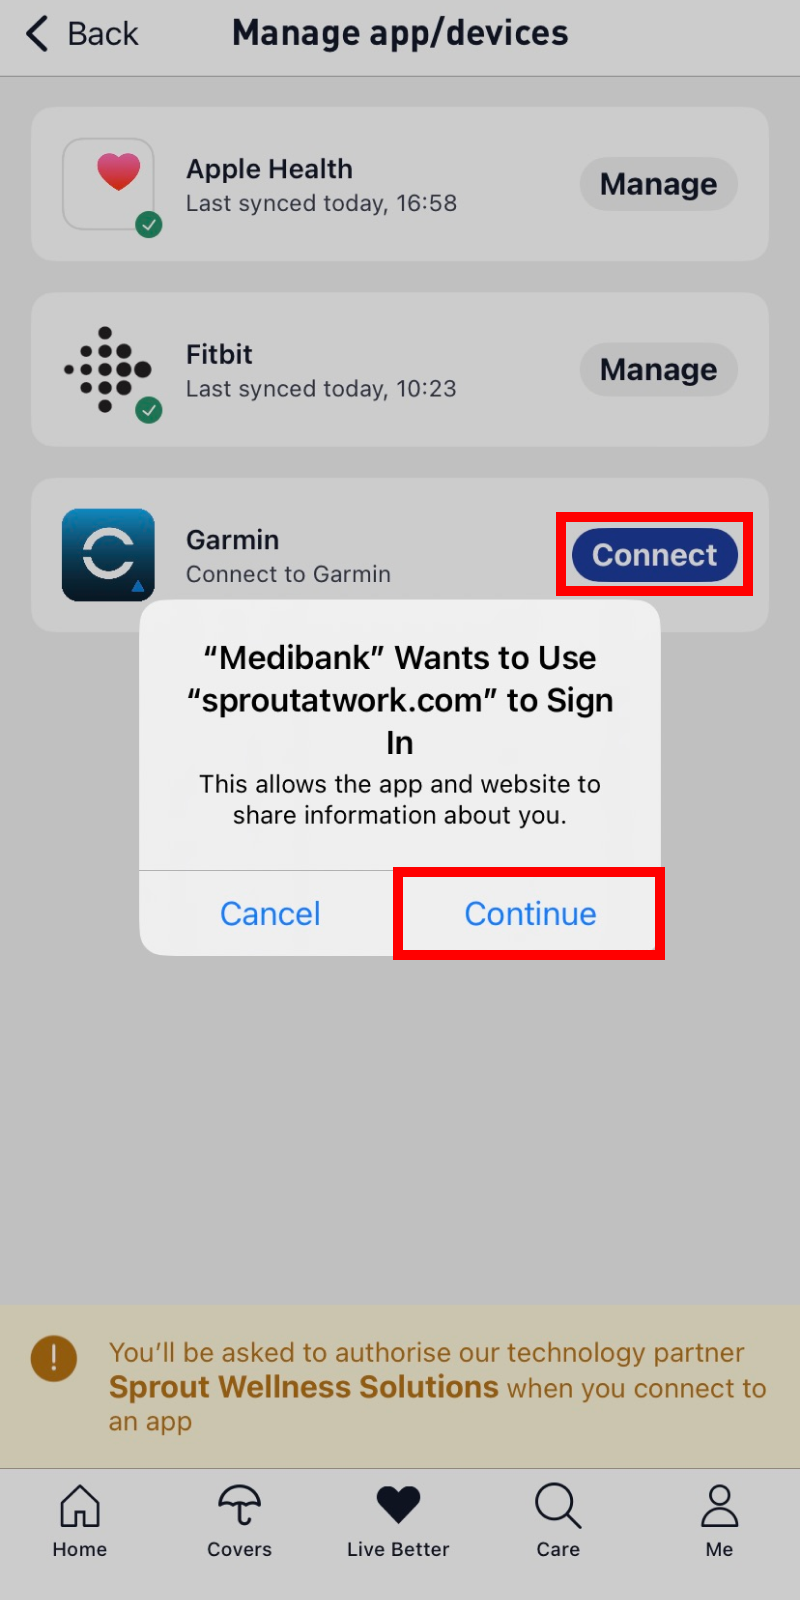 Garmin option under Manage app/devices section on iPhone settings